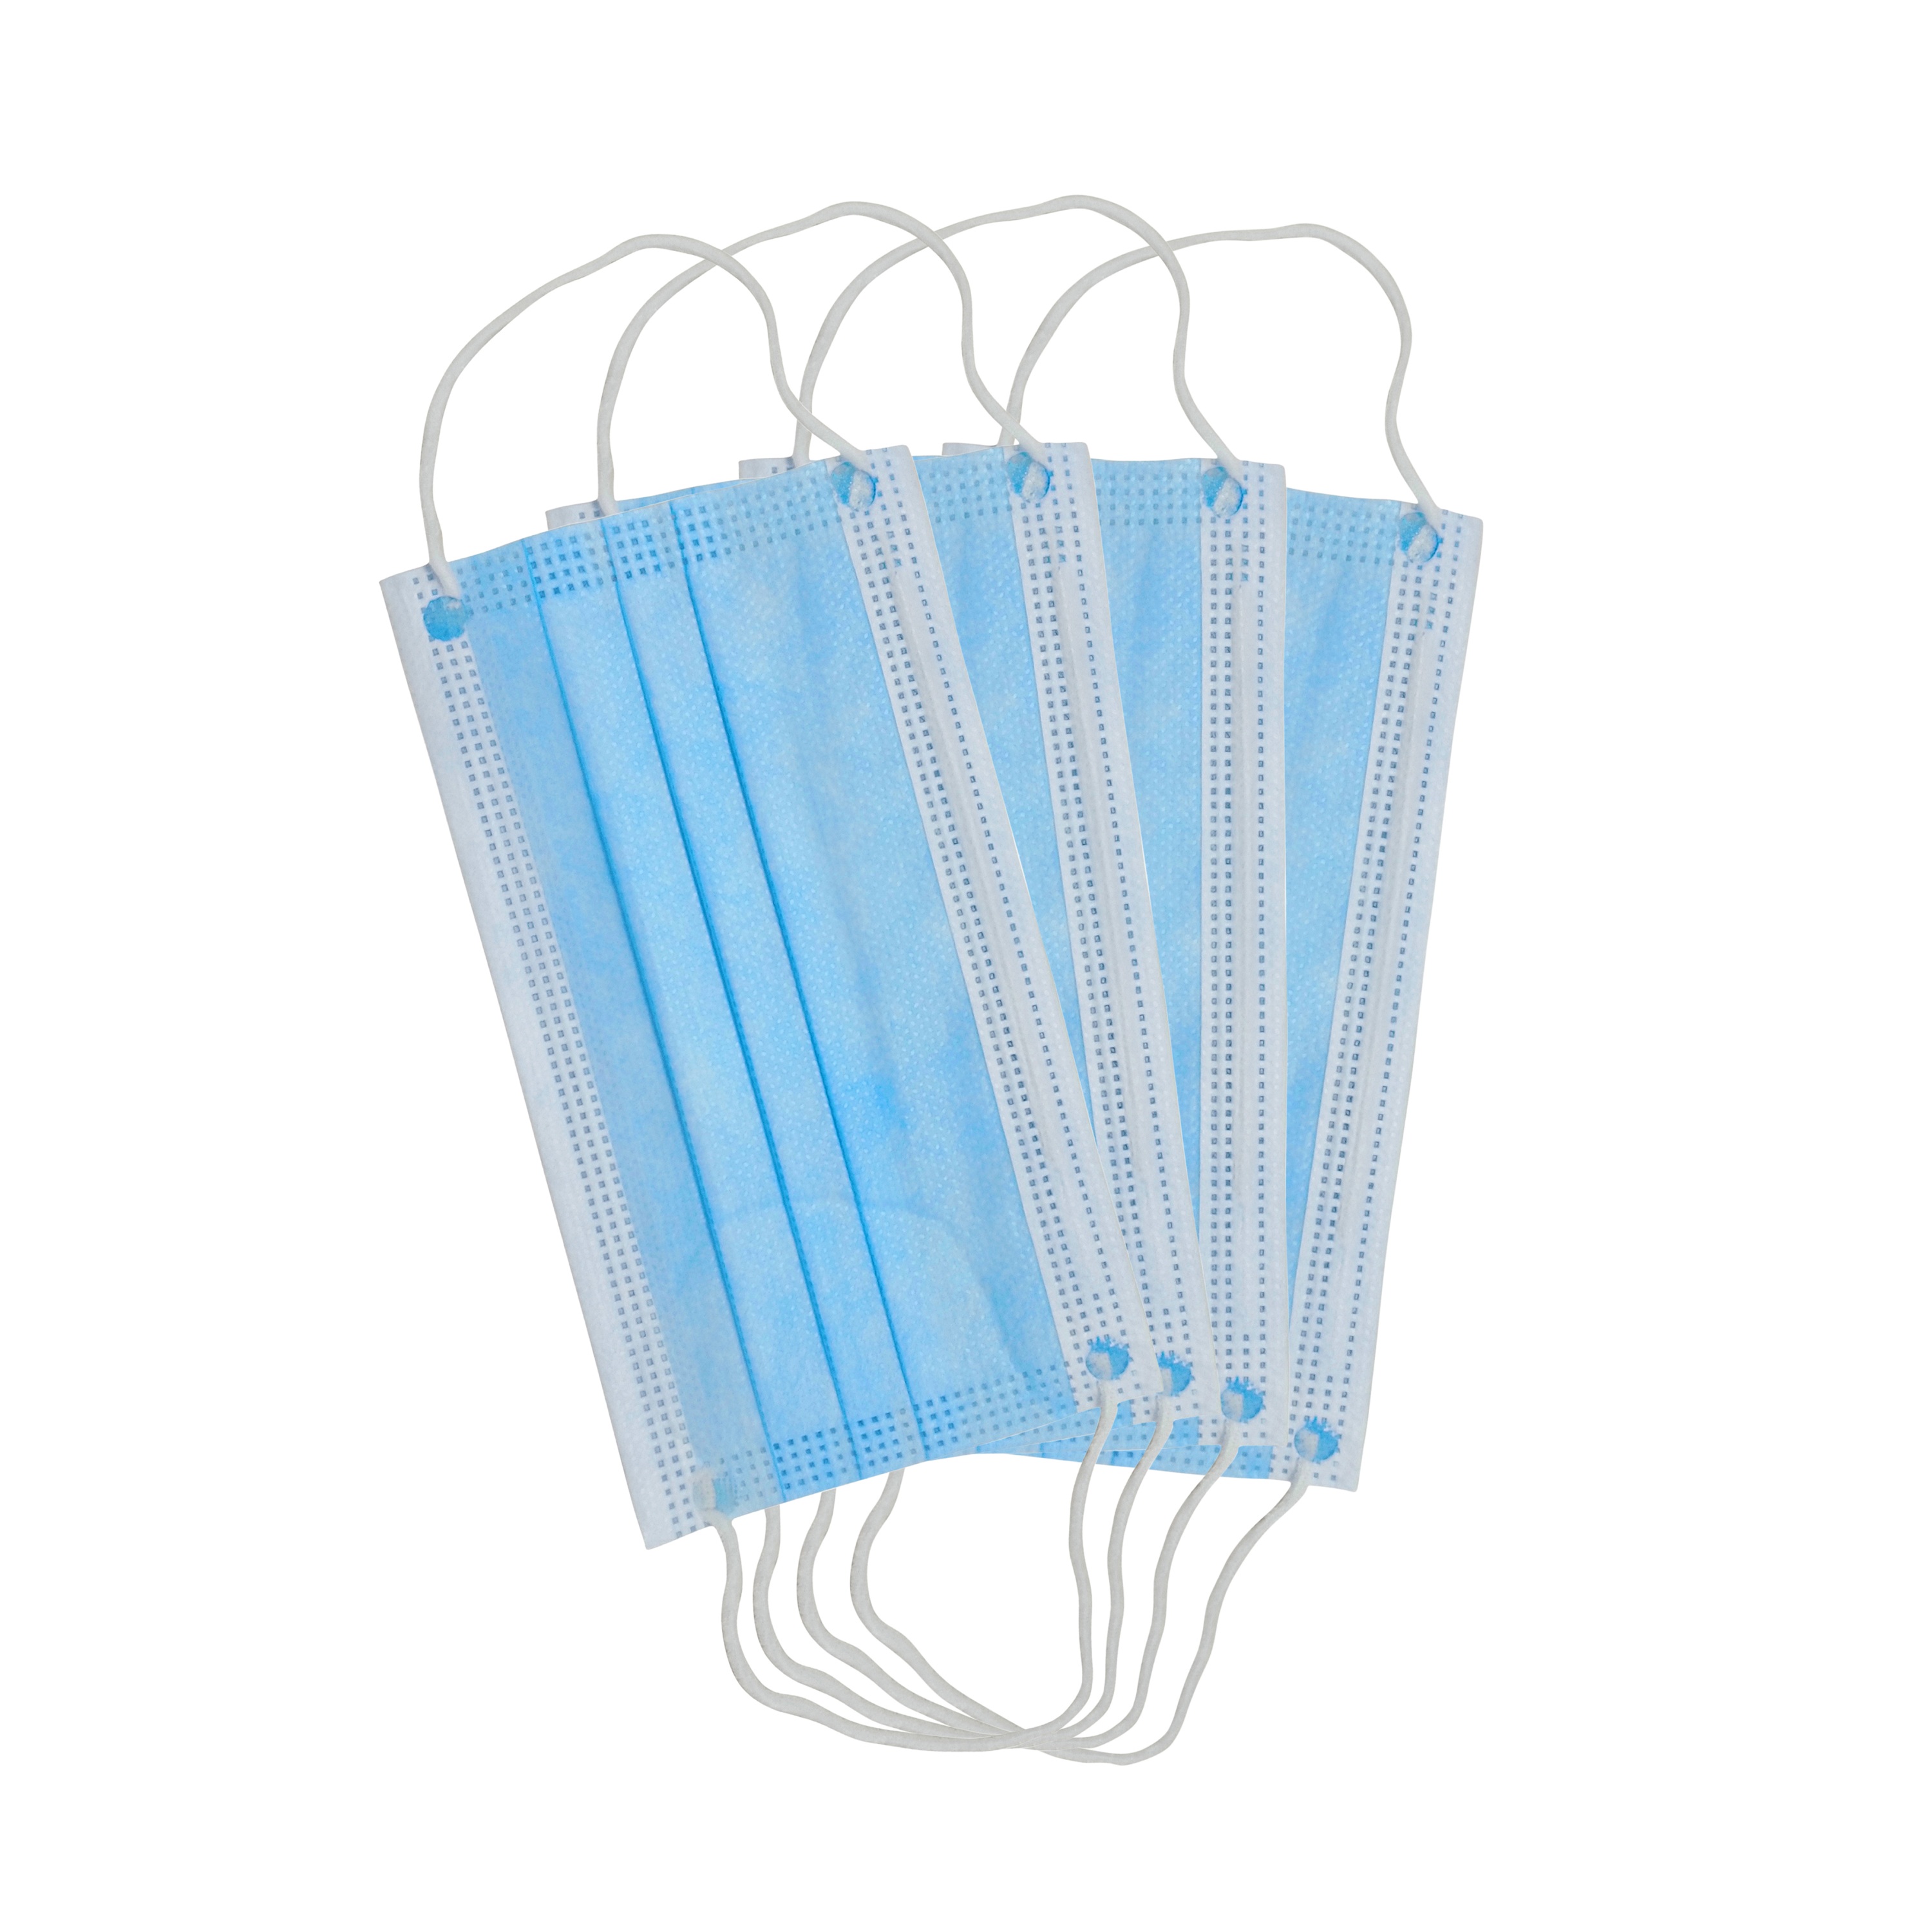 Anti-virus Disposable Medical Surgical Protection Masks